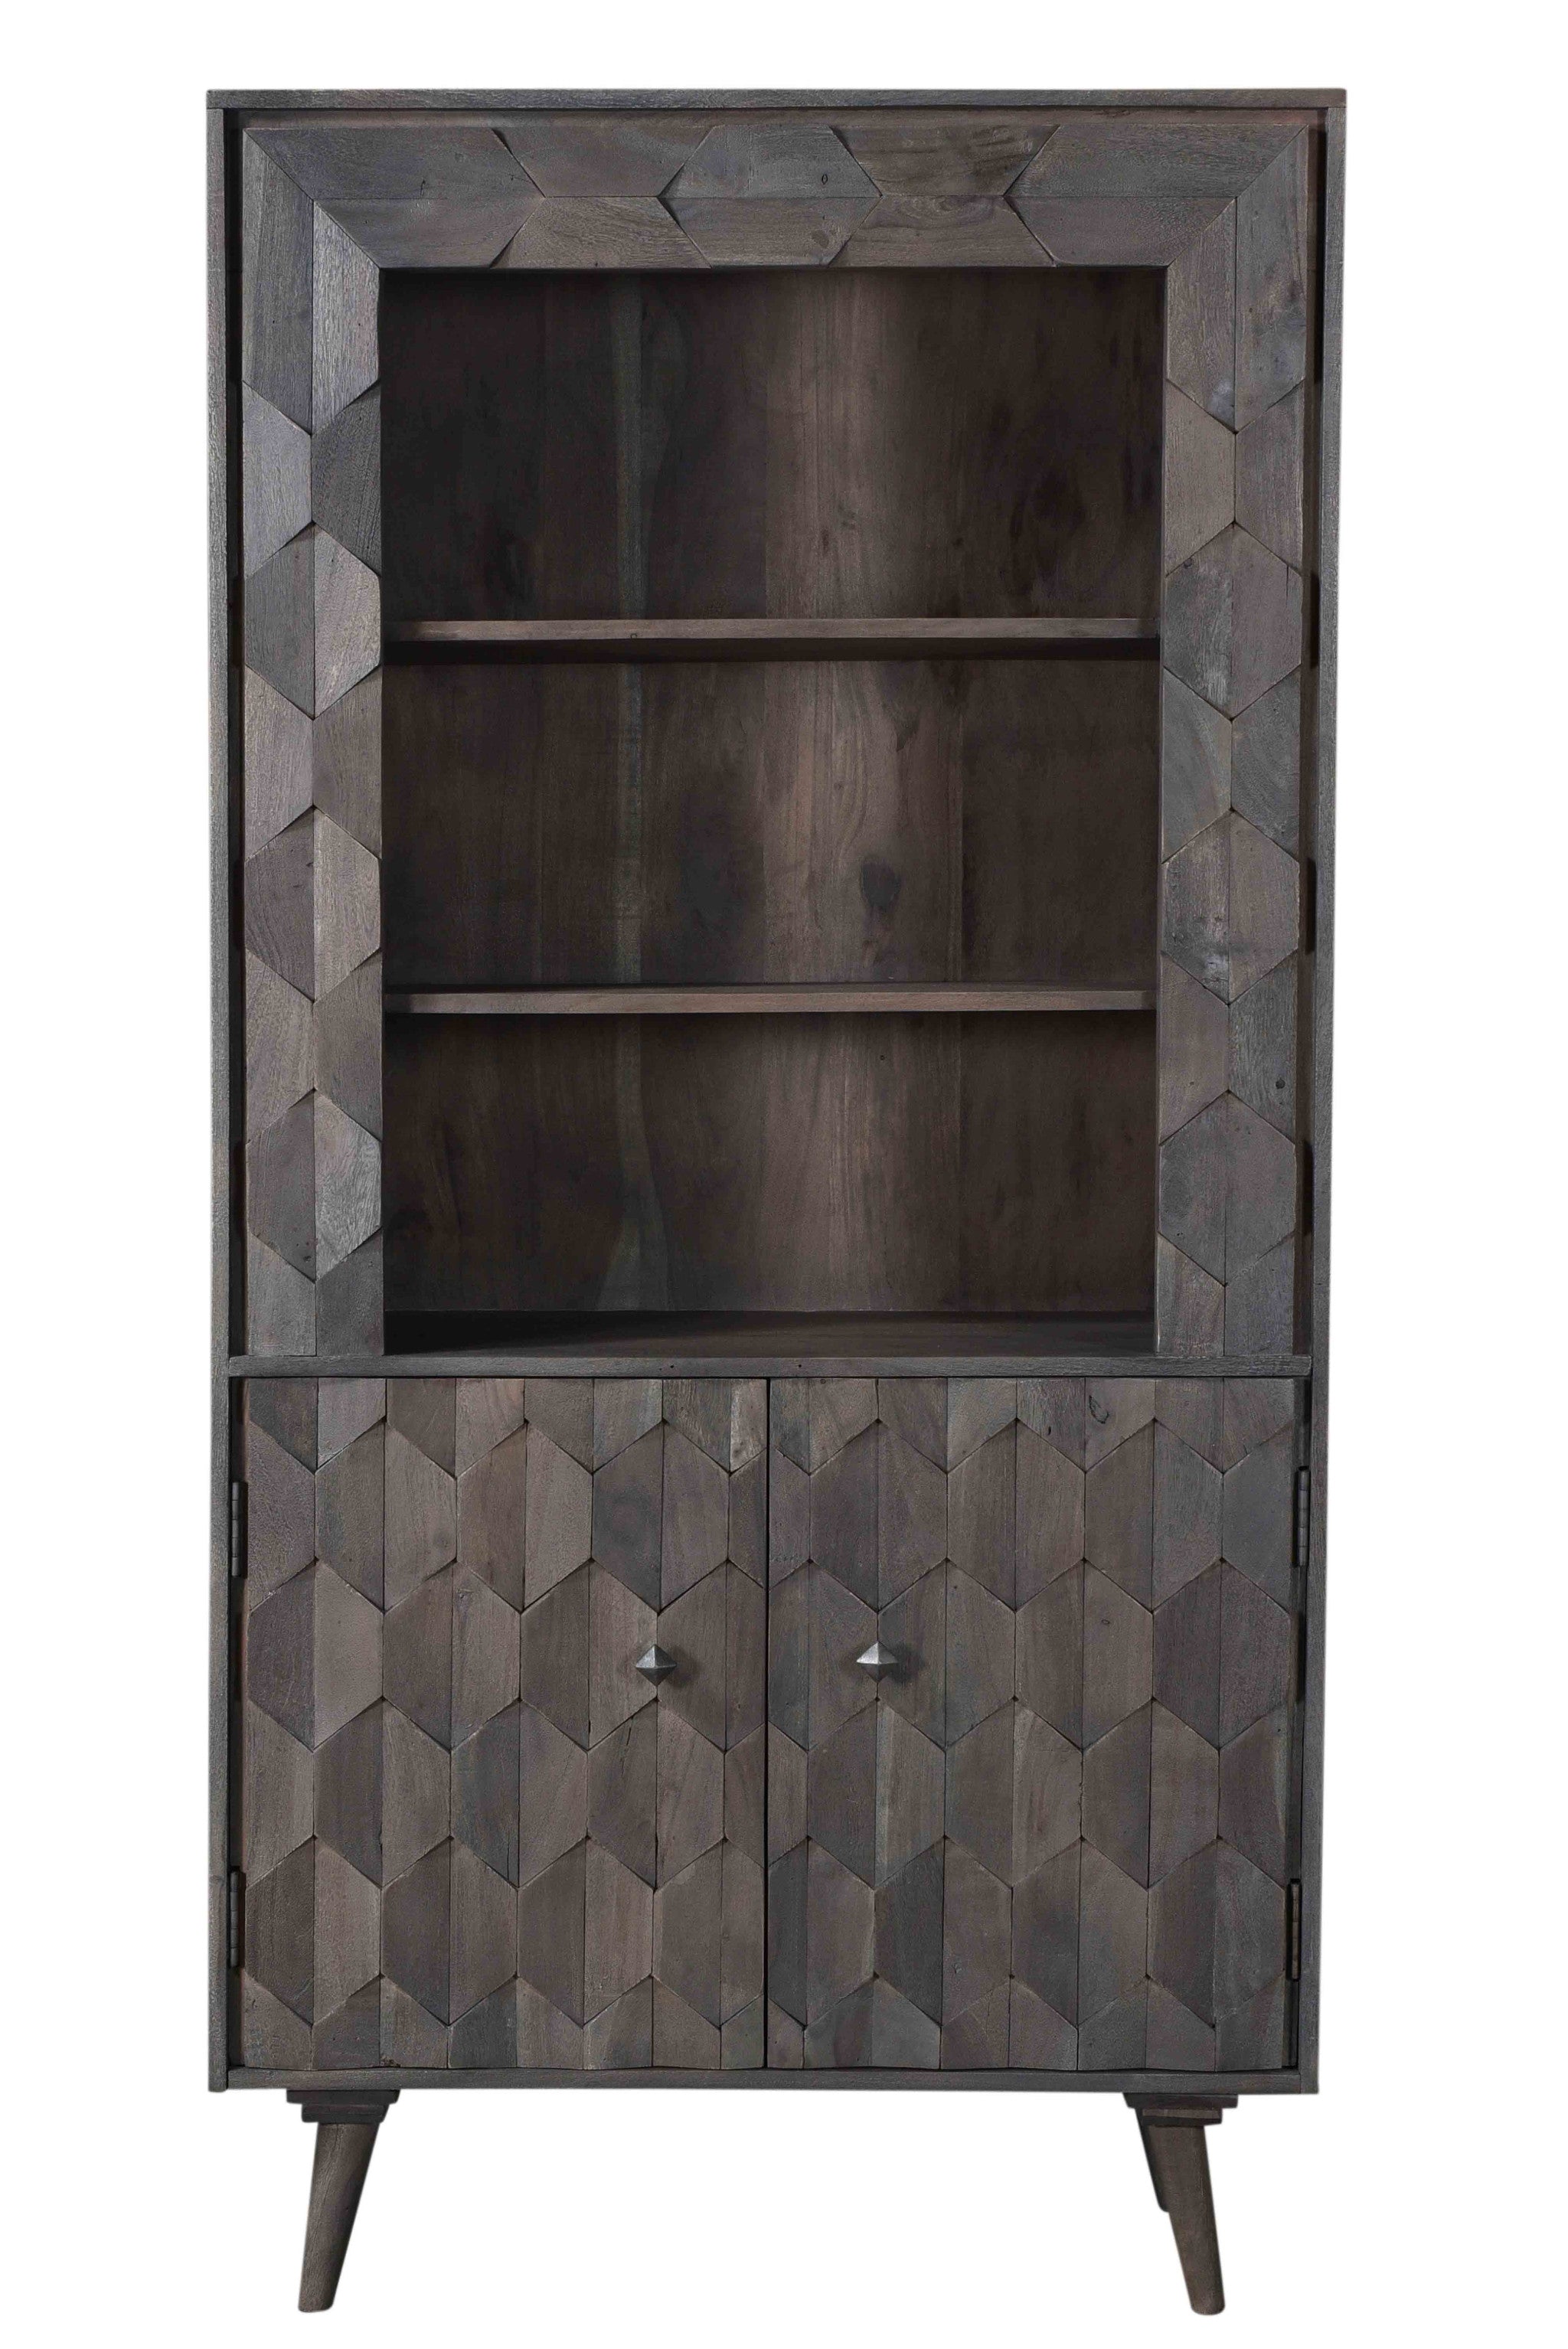 70" Gray Distressed Solid Wood Three Tier Bookcase with Two Doors